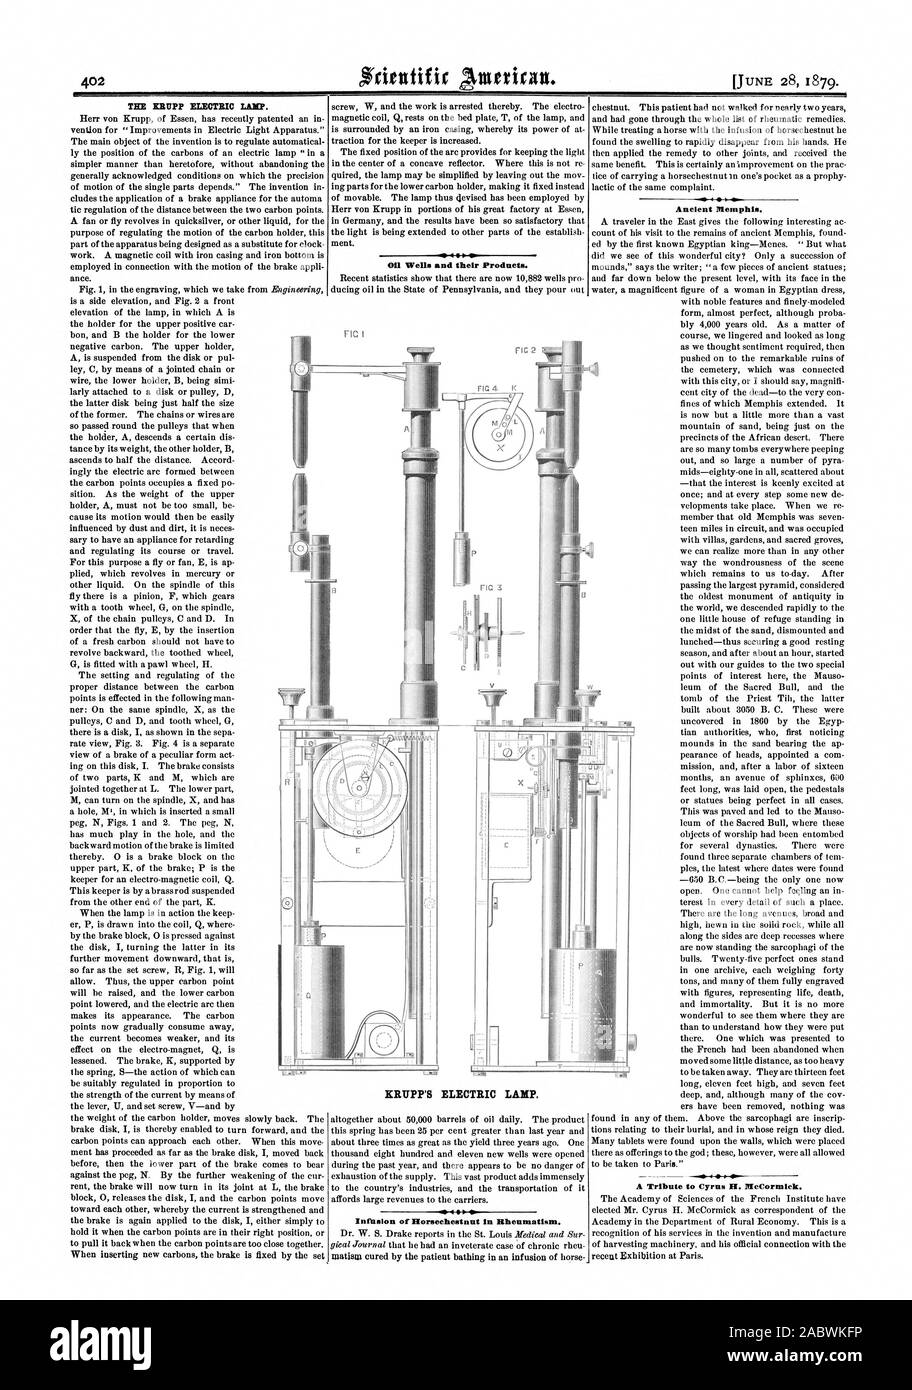 OH Wells and their Products. KRUPP'S ELECTRIC LANE Infusion of Borsechestnut in Rheumatism. Ancient Memphis. A Tribute to Cyrus H. McCormick., scientific american, 1879-06-28 Stock Photo